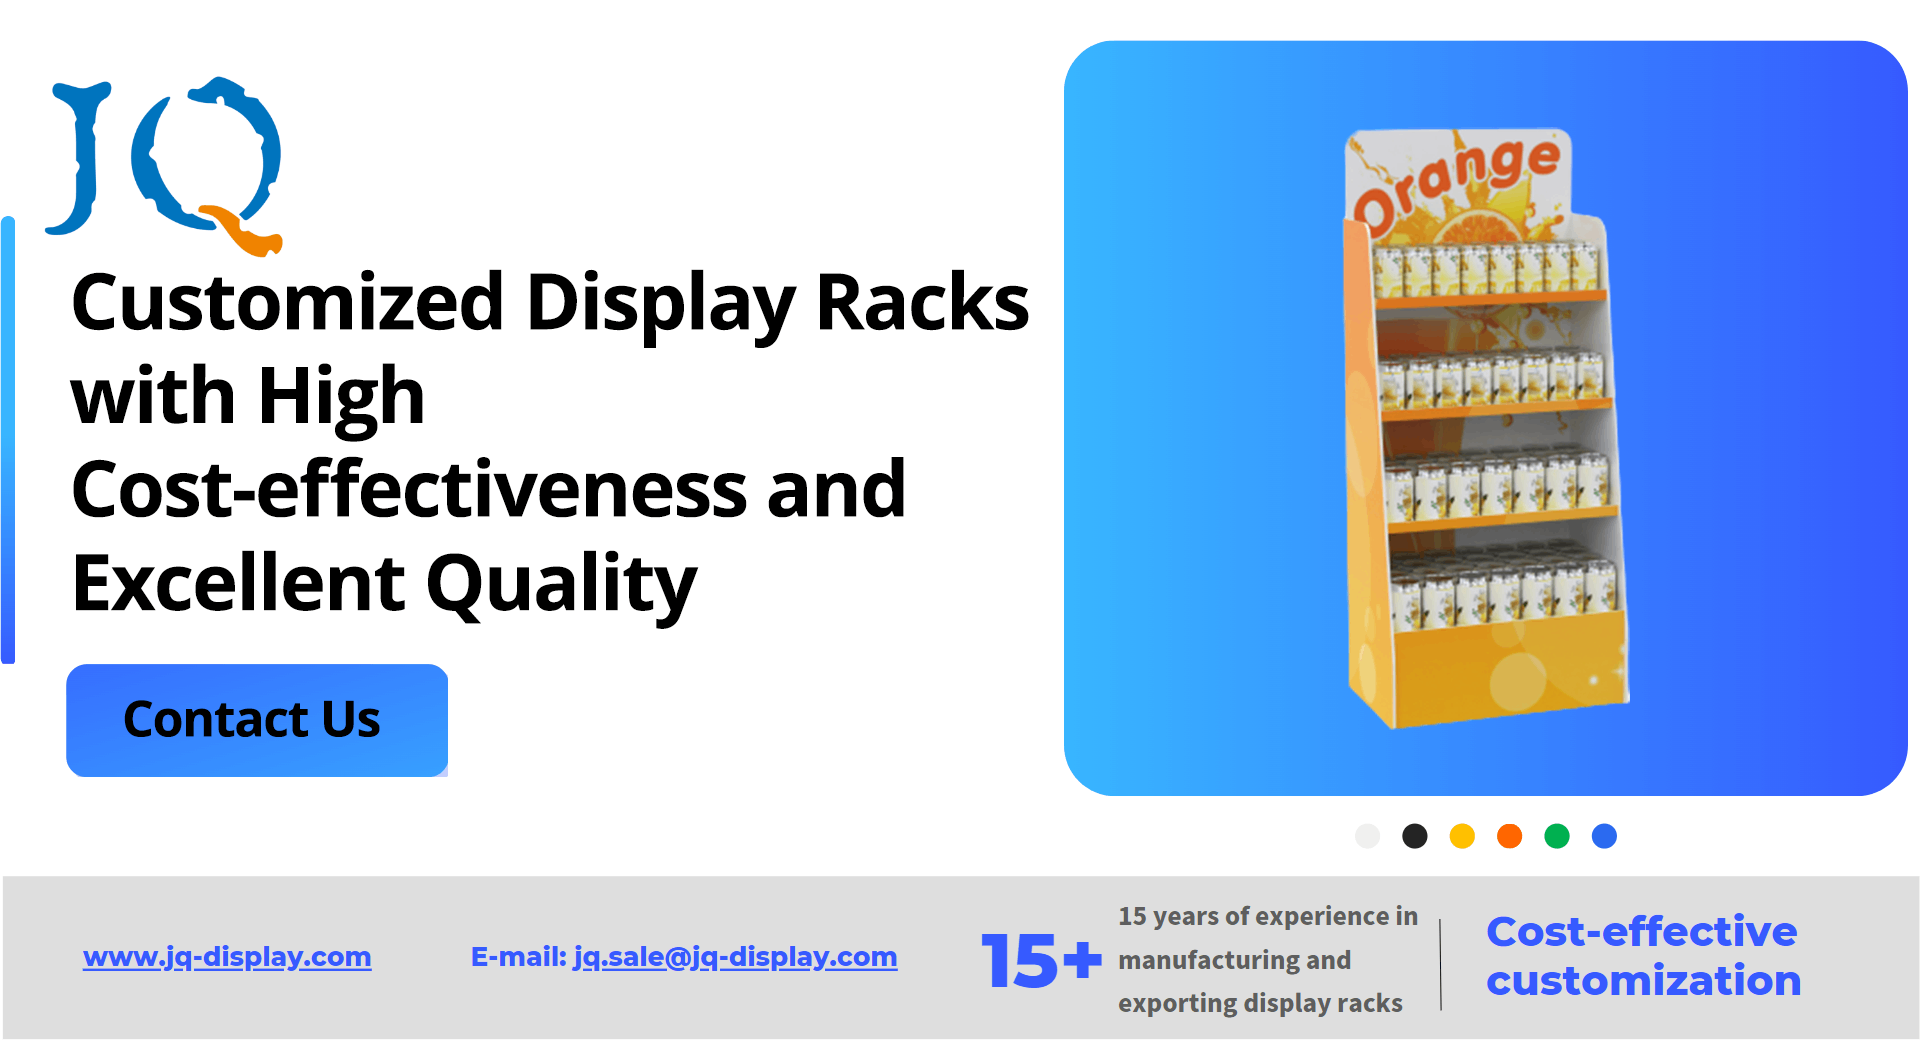 Customized Display Racks with High Cost-effectiveness and Excellent Quality